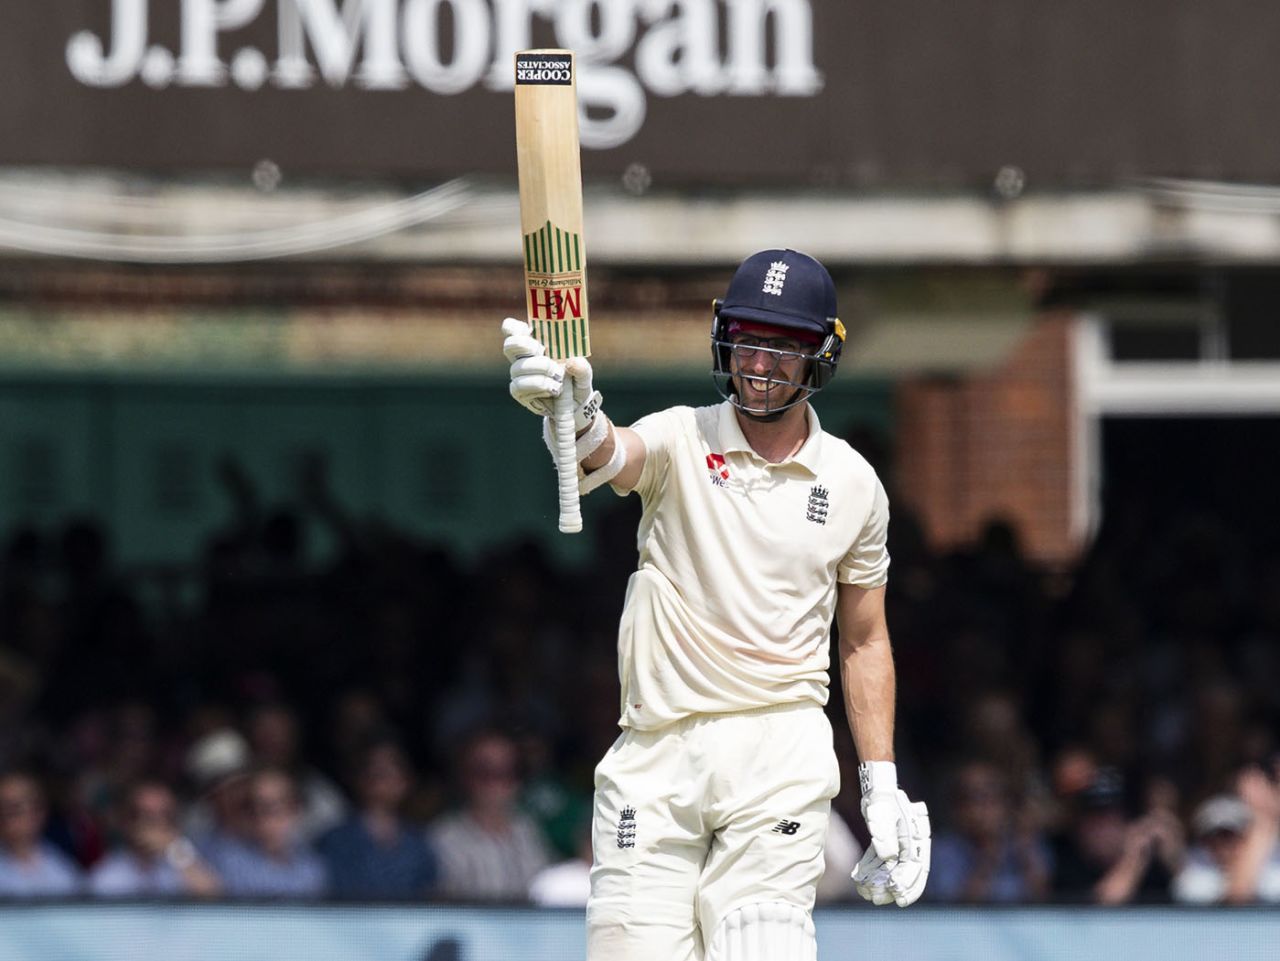 Jack Leach raises his bat for his maiden Test fifty, England v Ireland, Only Test, 2nd day, July 25, 2019